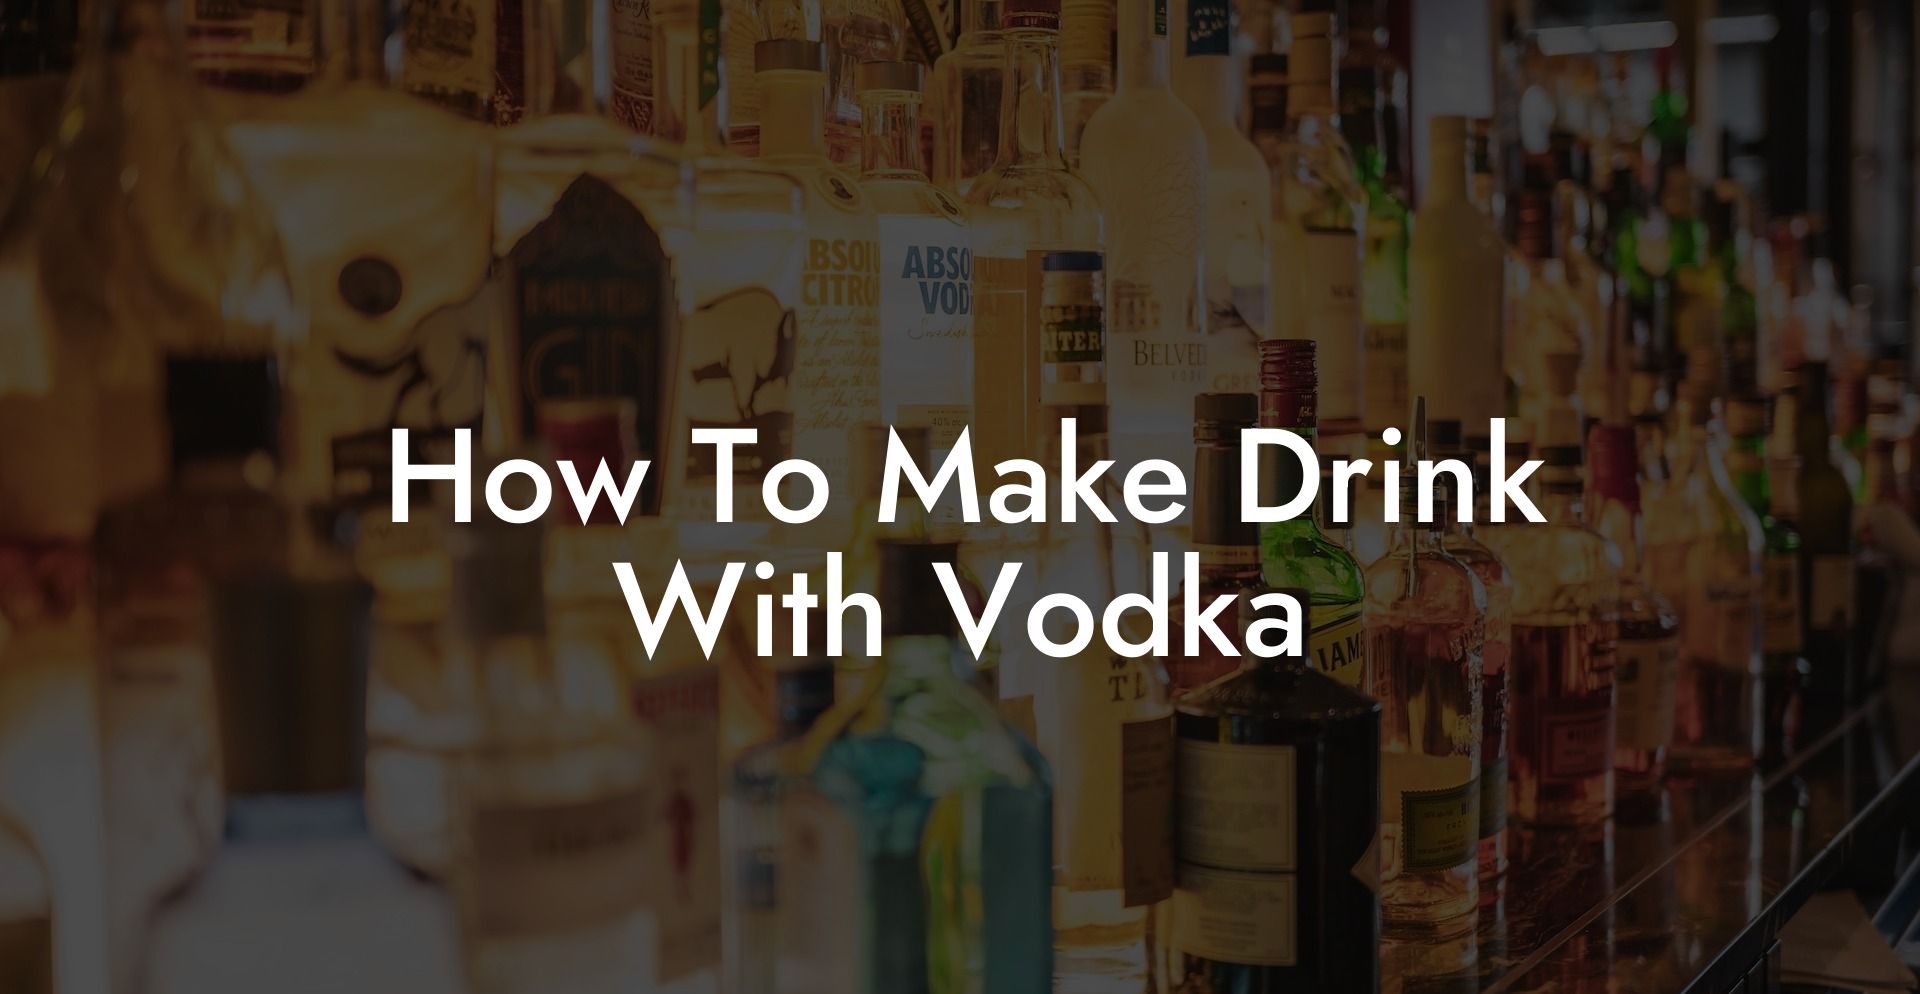 How To Make Drink With Vodka